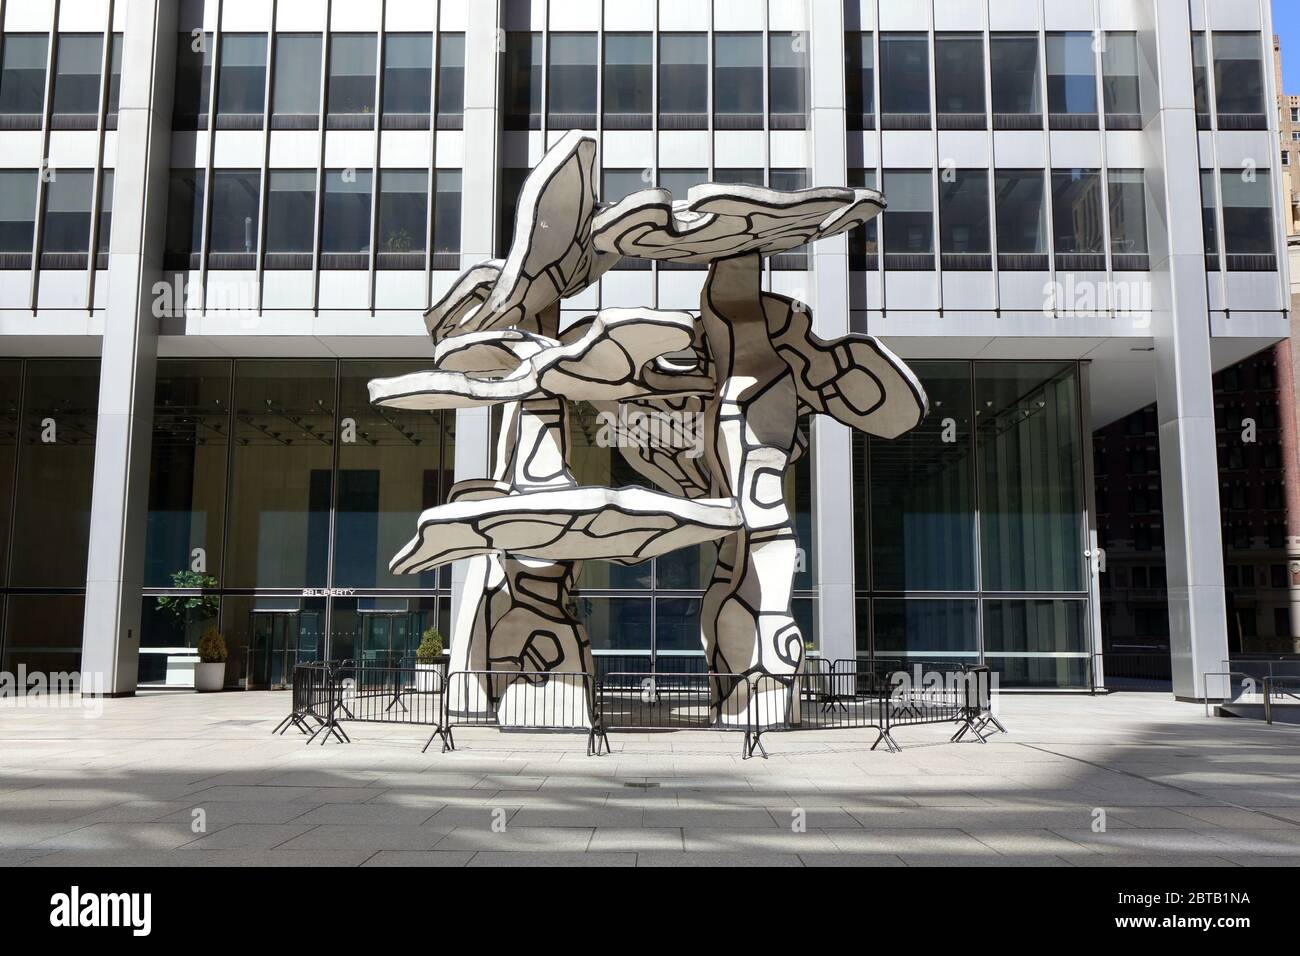 The 'Group of Four Trees' sculpture by Jean Dubuffet surrounded by barricades in front of the former Chase Manhattan Building, 28 Liberty, in New York Stock Photo